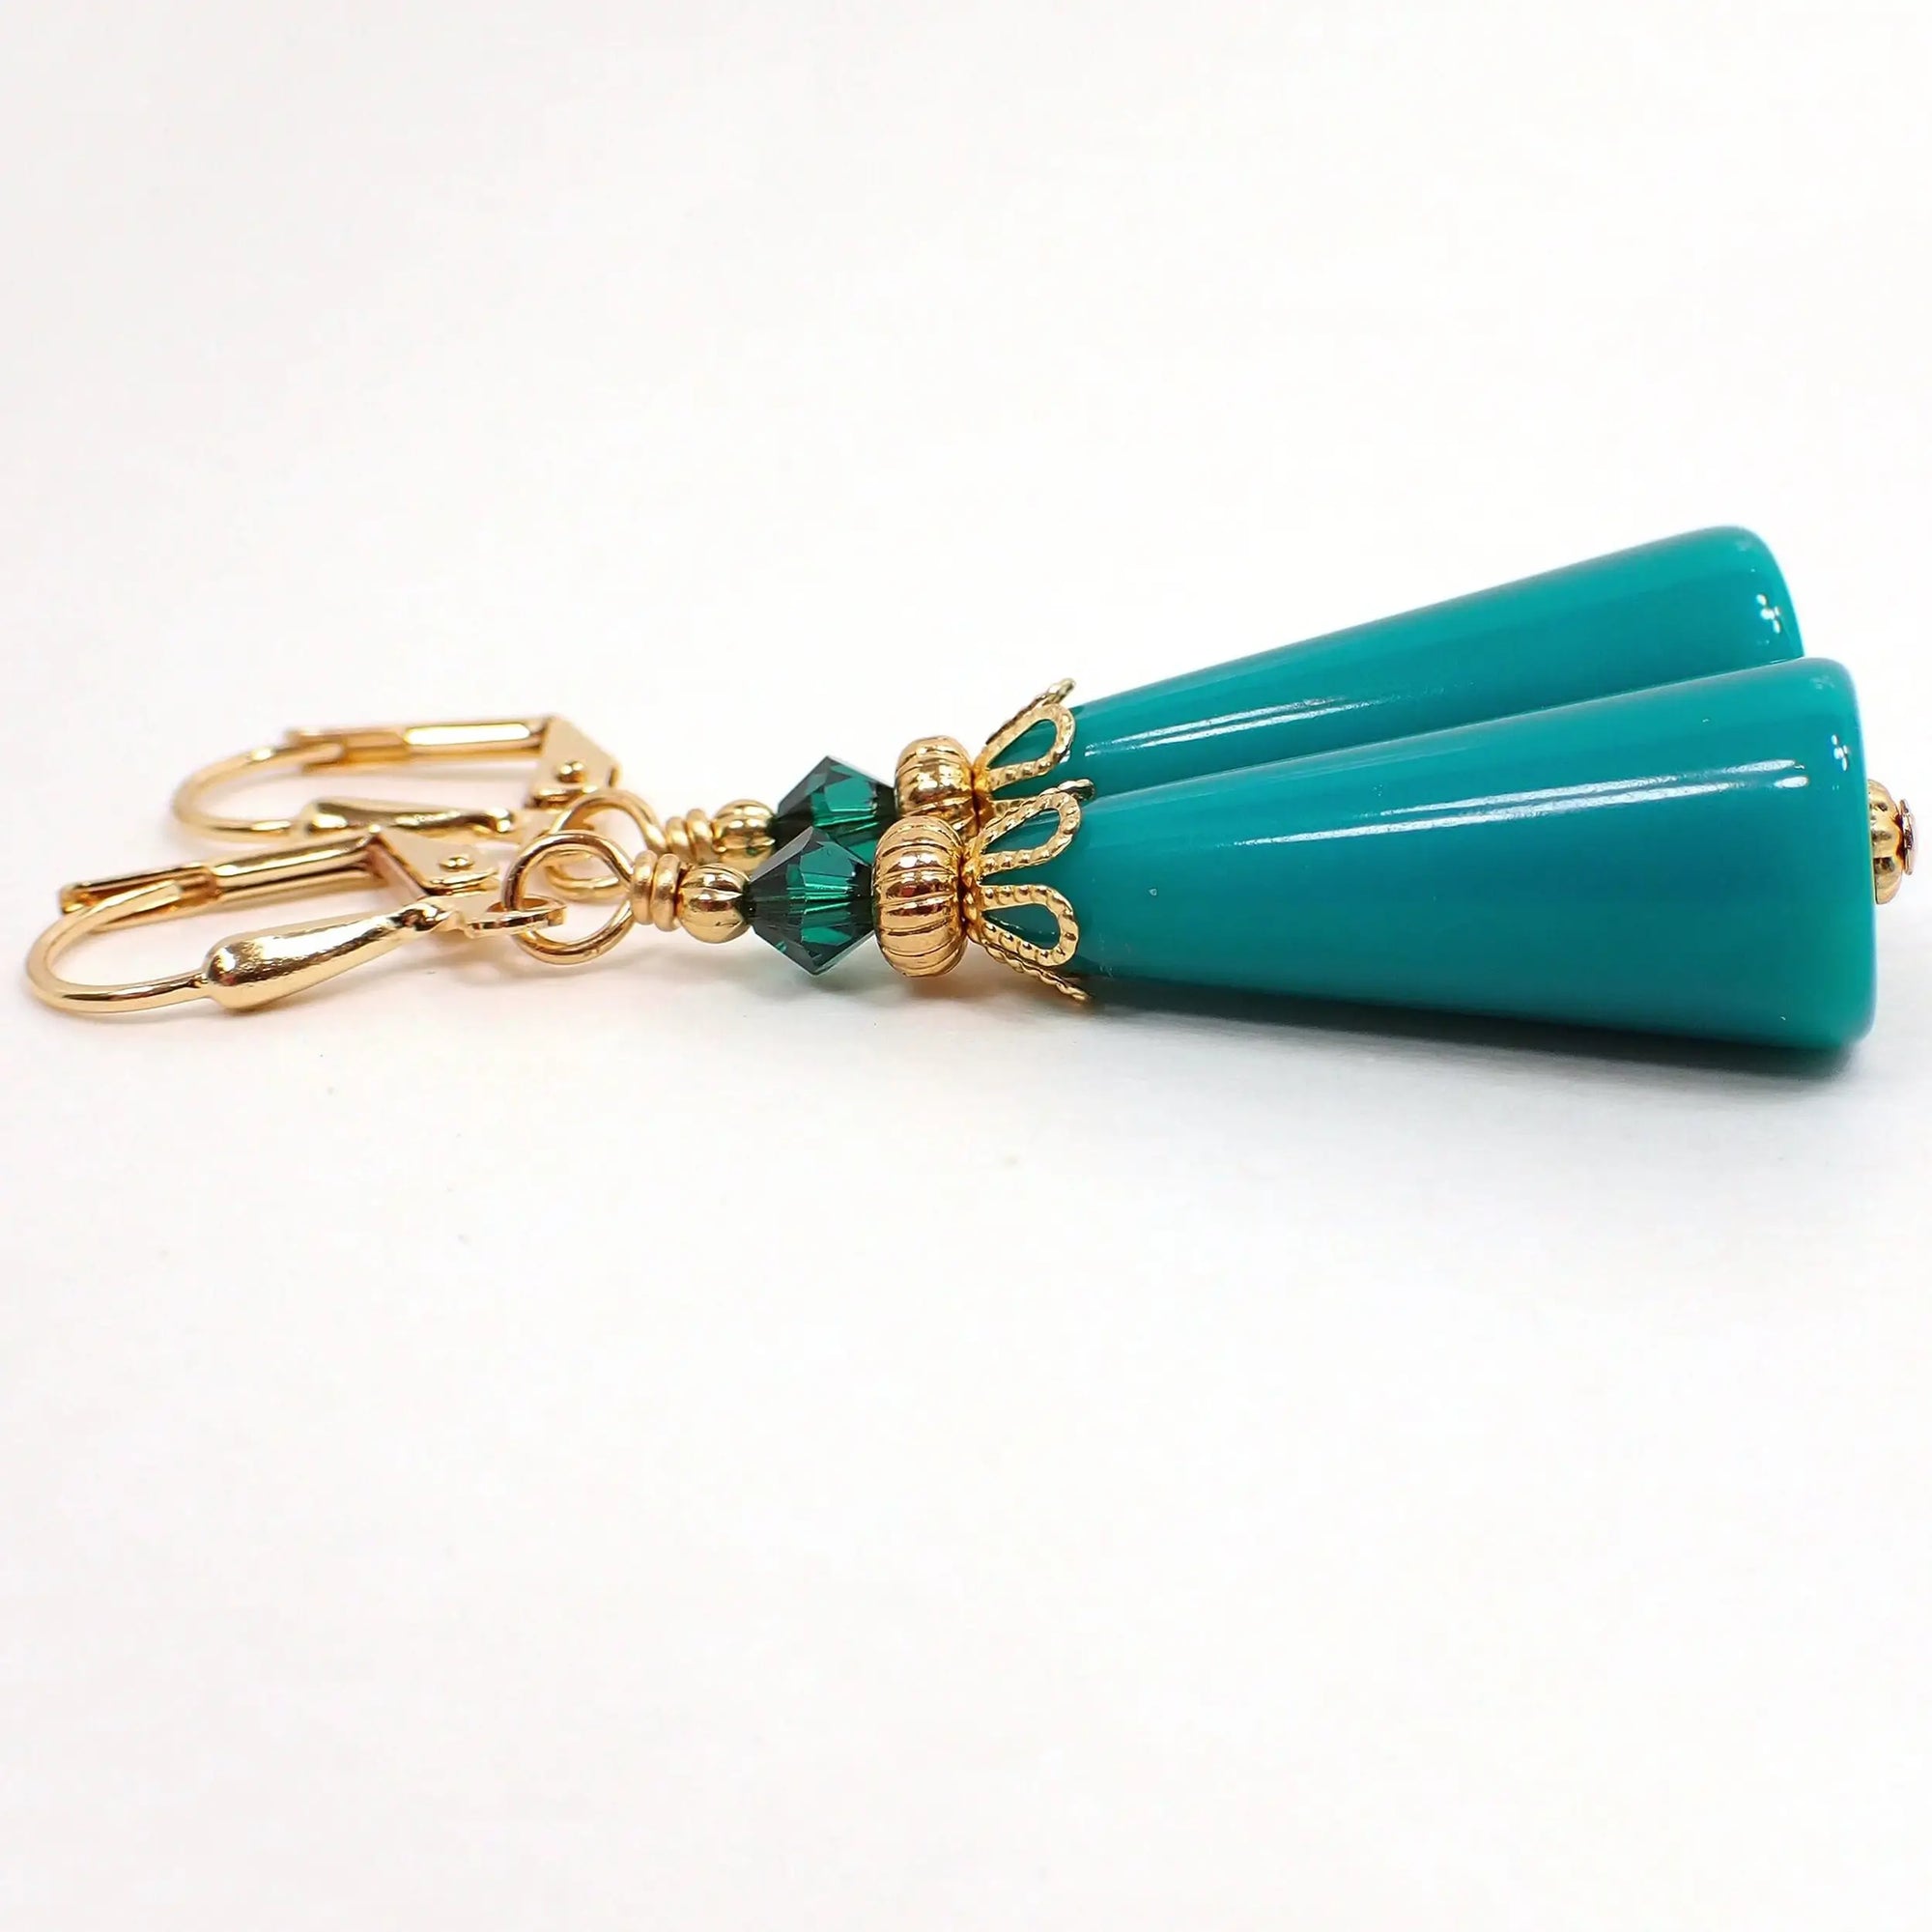 Side view of the handmade geometric cone earrings. The metal is gold plated in color. There is a faceted dark green glass crystal bead at the top. The bottom cone shaped bead is a vintage lucite bead in teal green.